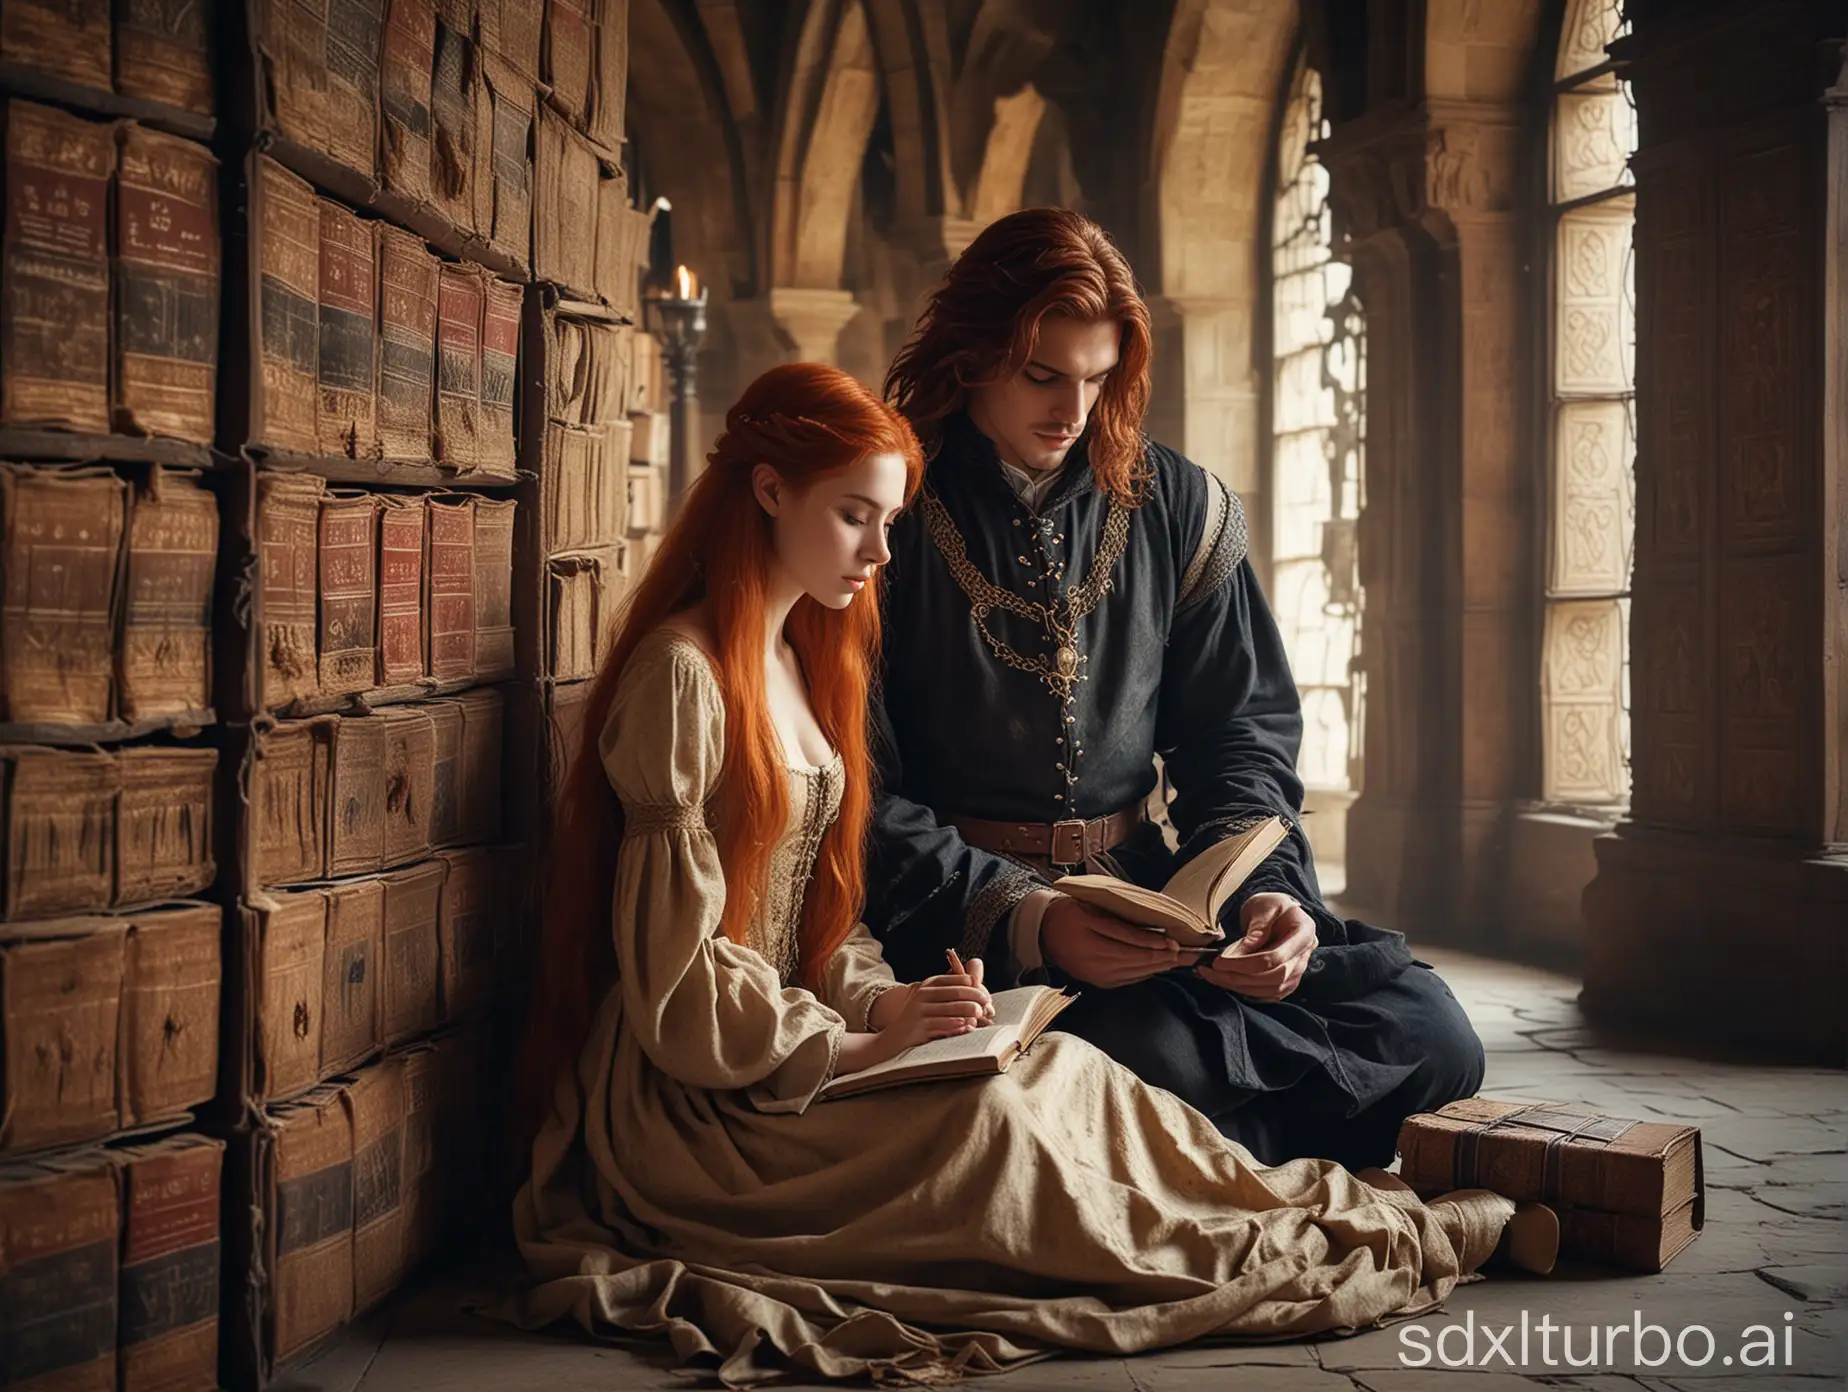 A beautiful girl with long red hair in a <((((medieval))))>dress and a handsome guy with dark hair in <(((( medieval ))))> nice clothes, sit, engrossed in reading an old ancient folio, in an ancient library amidst many ancient books>